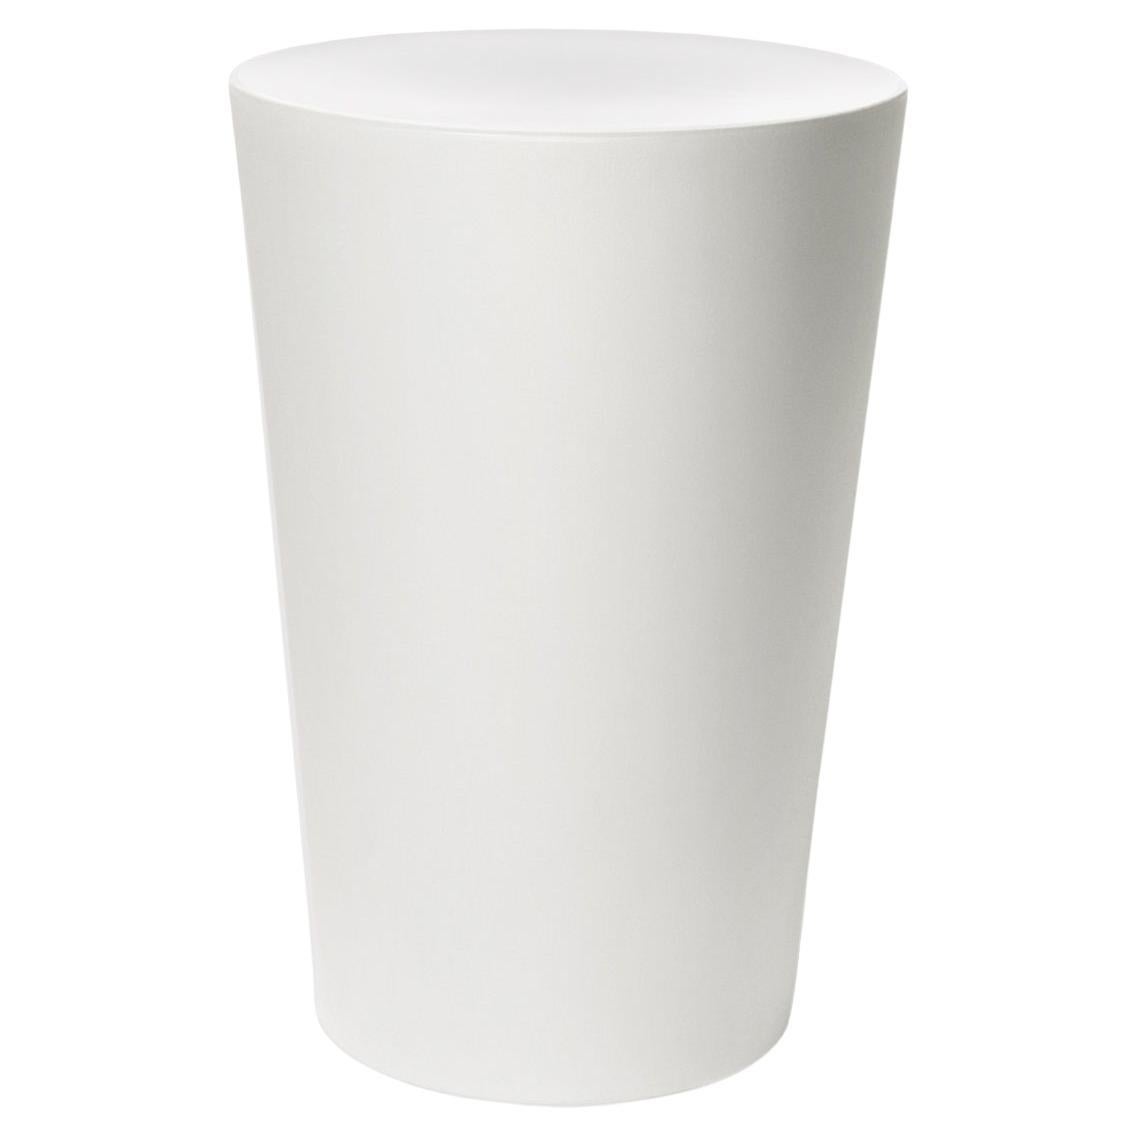 Moooi Container Stool in White by Marcel Wanders Studio For Sale